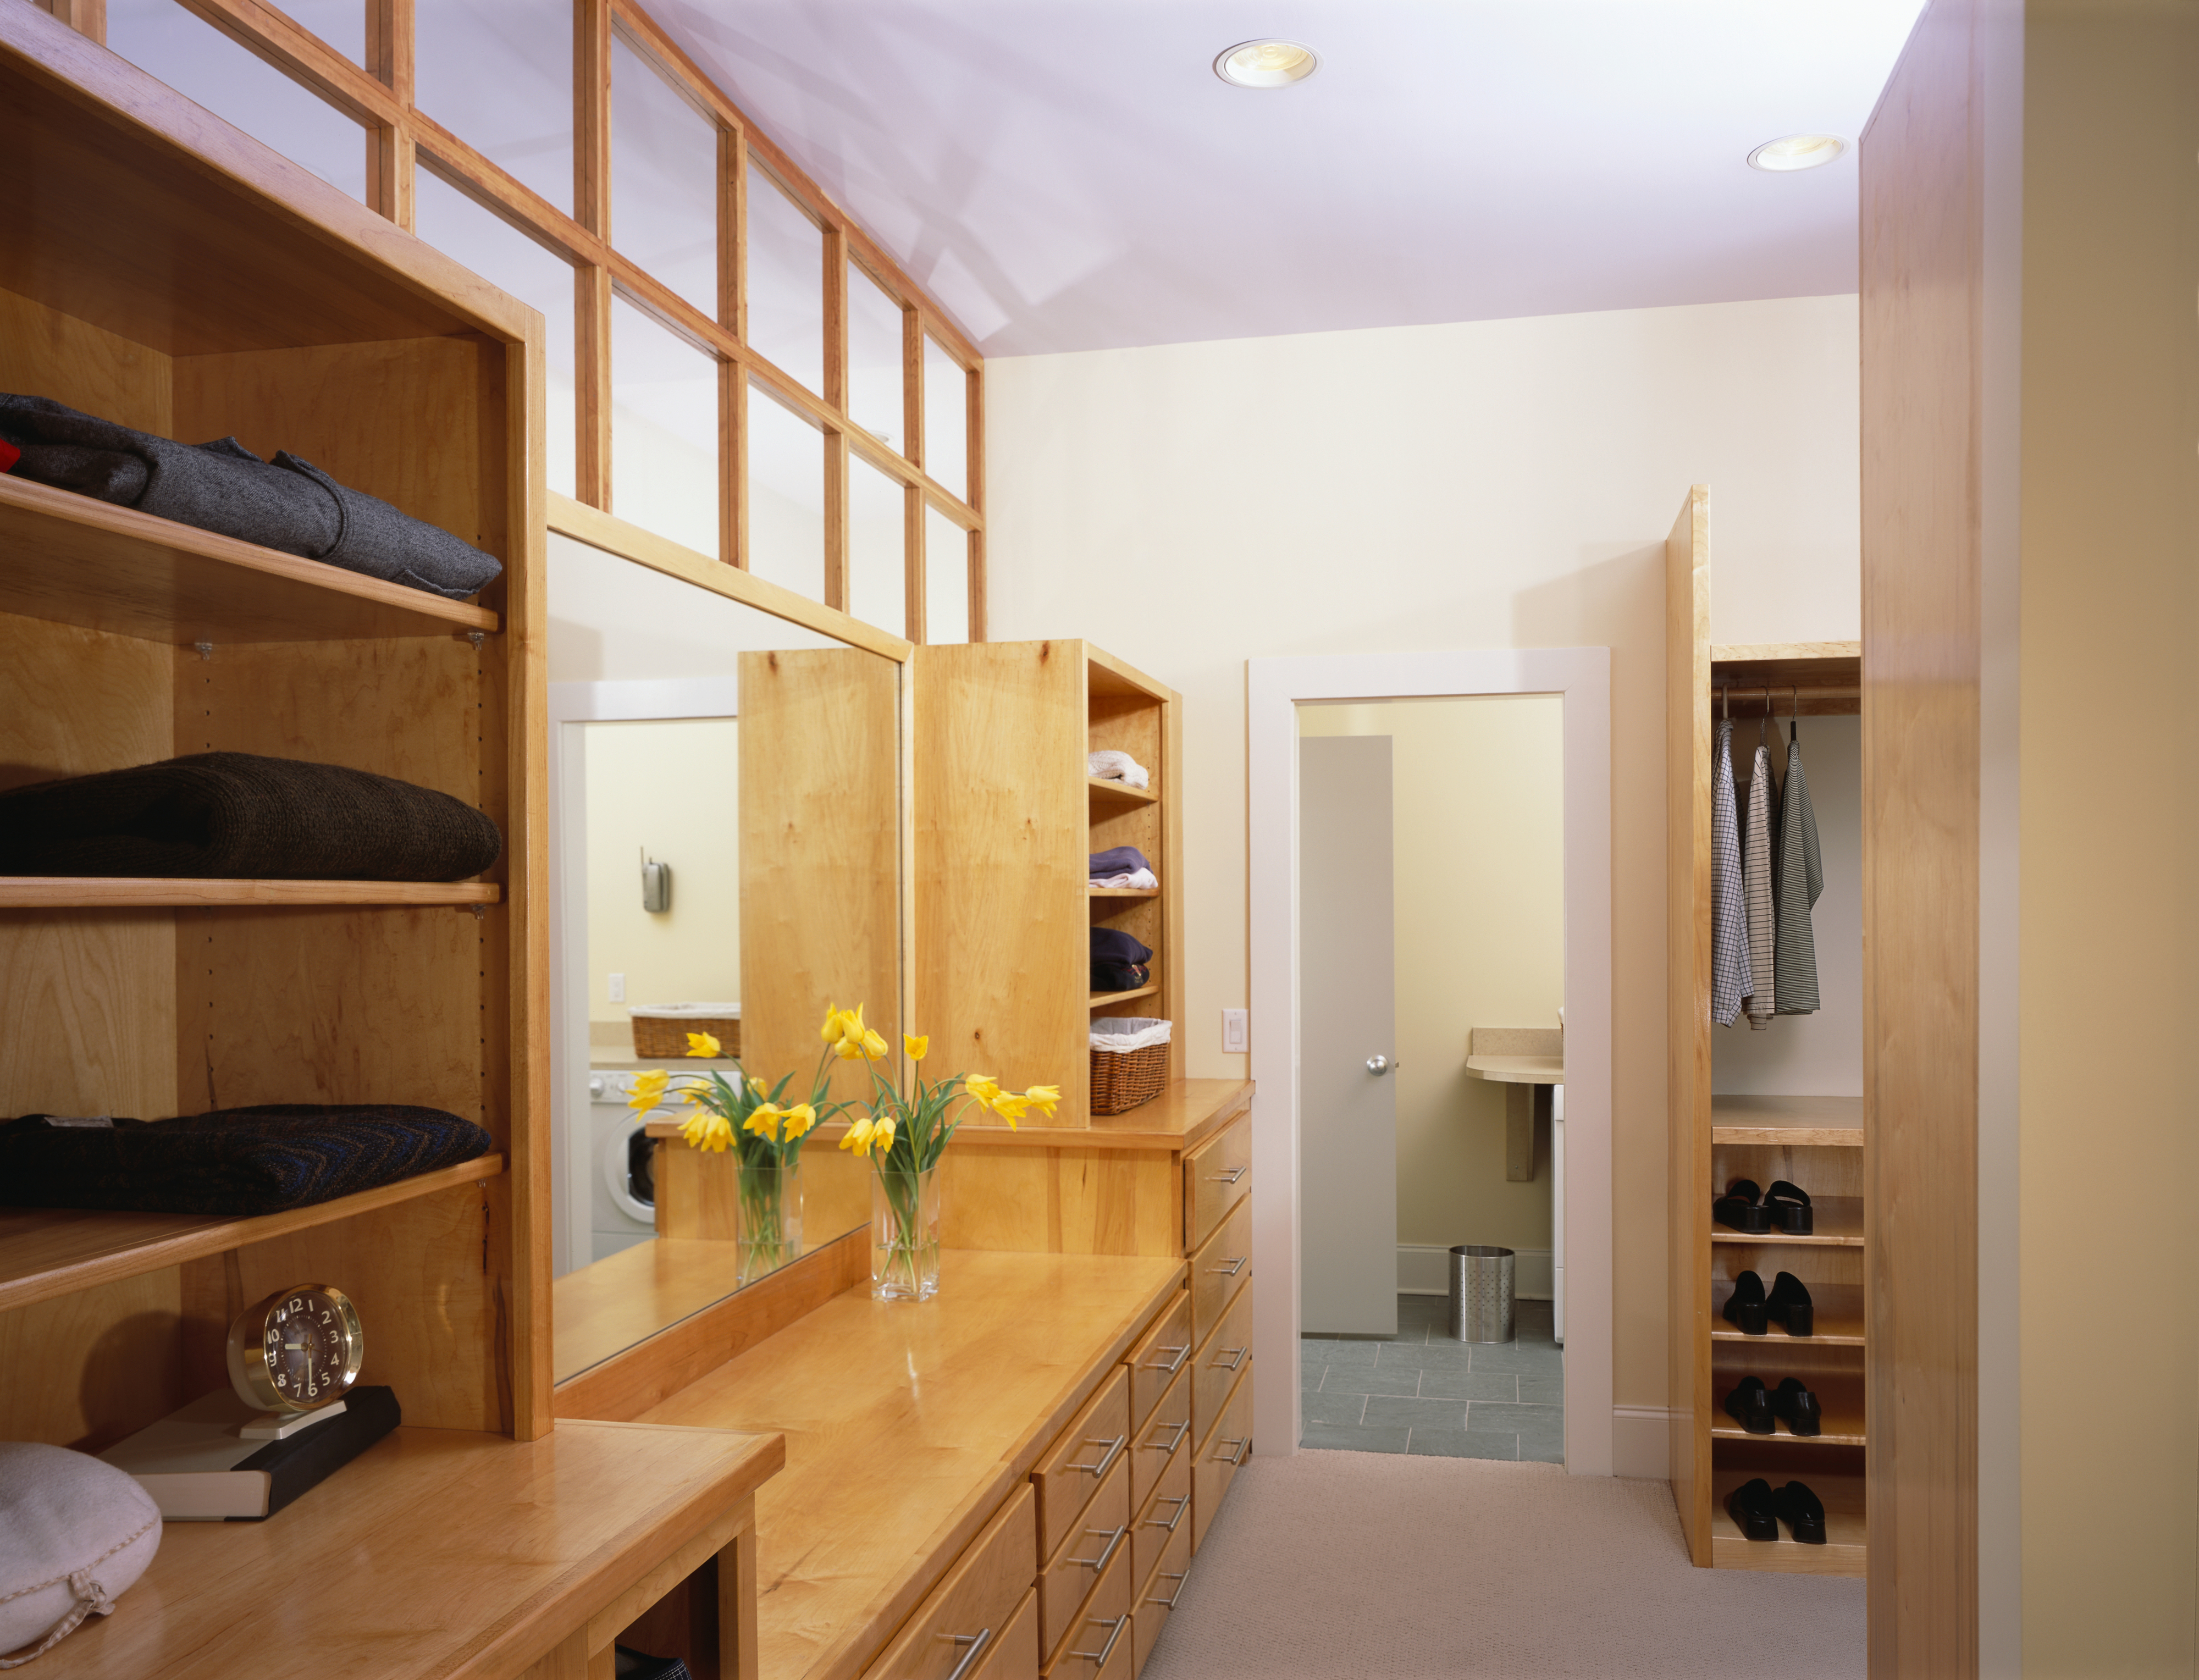 Walk-in closet with built-in wooden cabinets, shelves for shoes and clothes, a vanity area, and a bathroom entrance